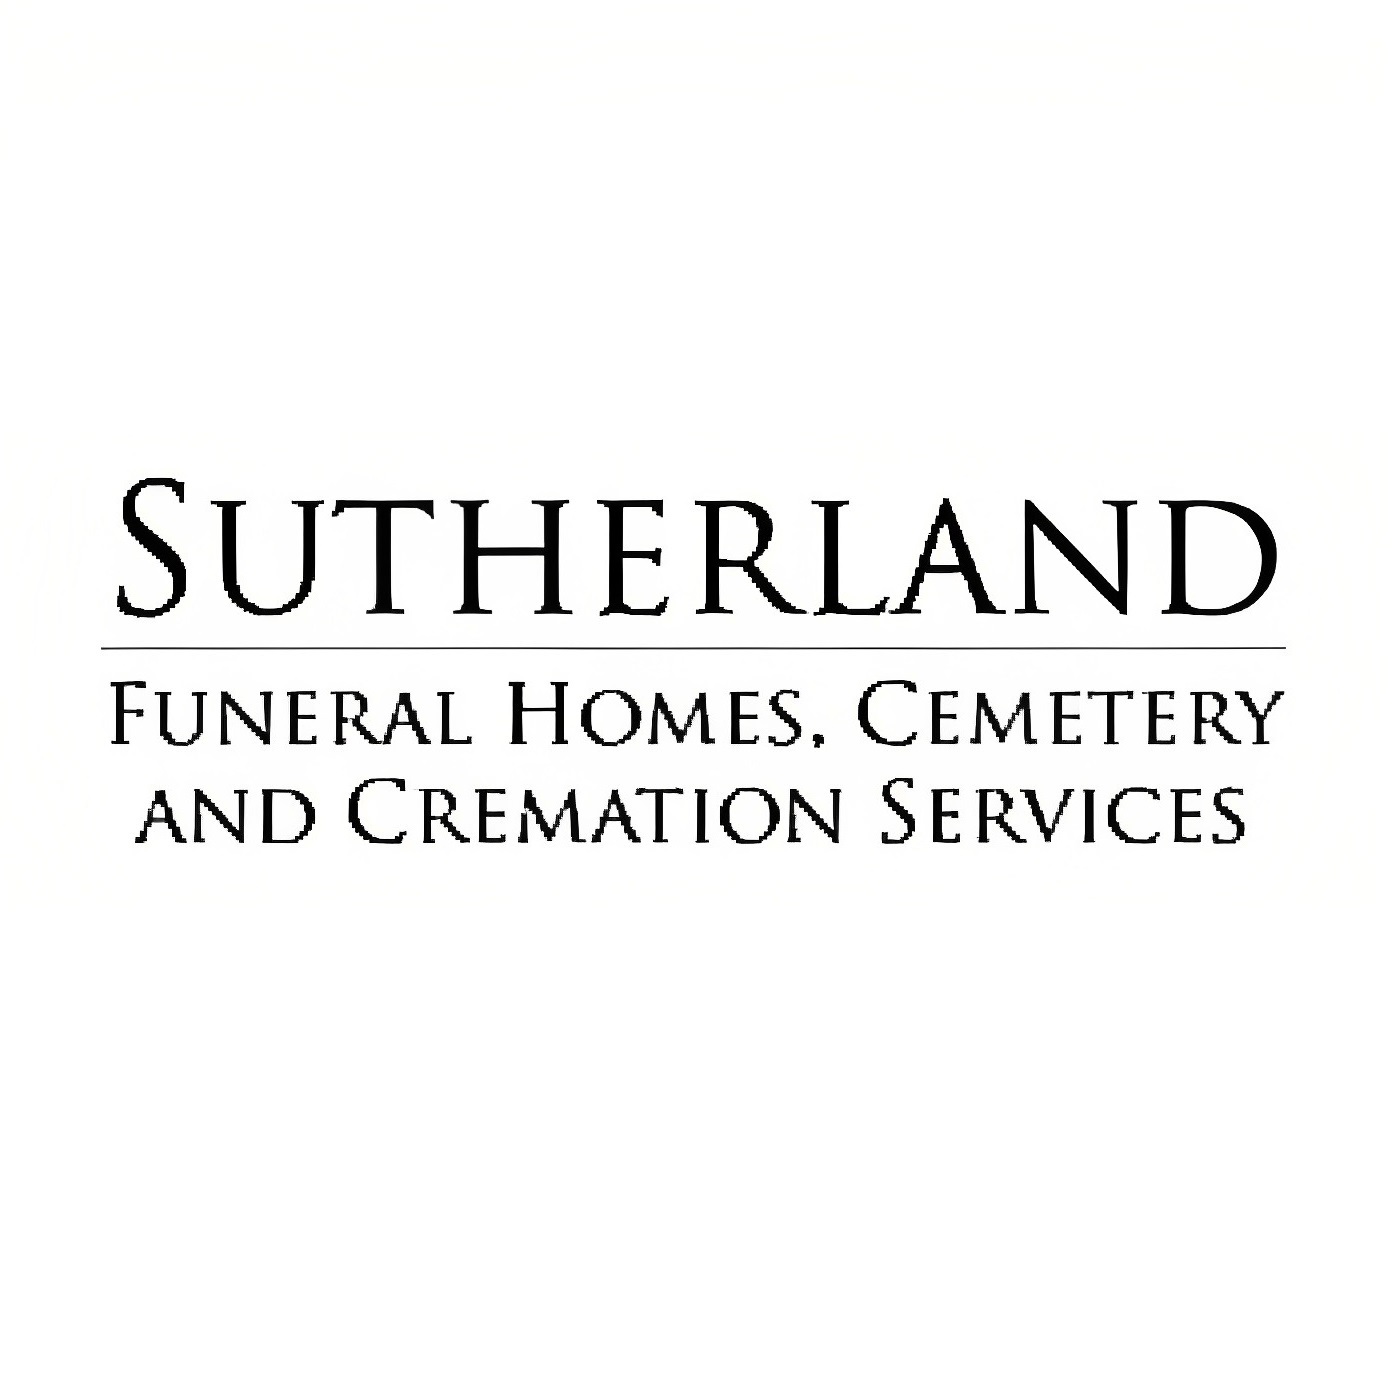 hillcrest cemetery, funeral home & cremation center | funeral directors in centralia